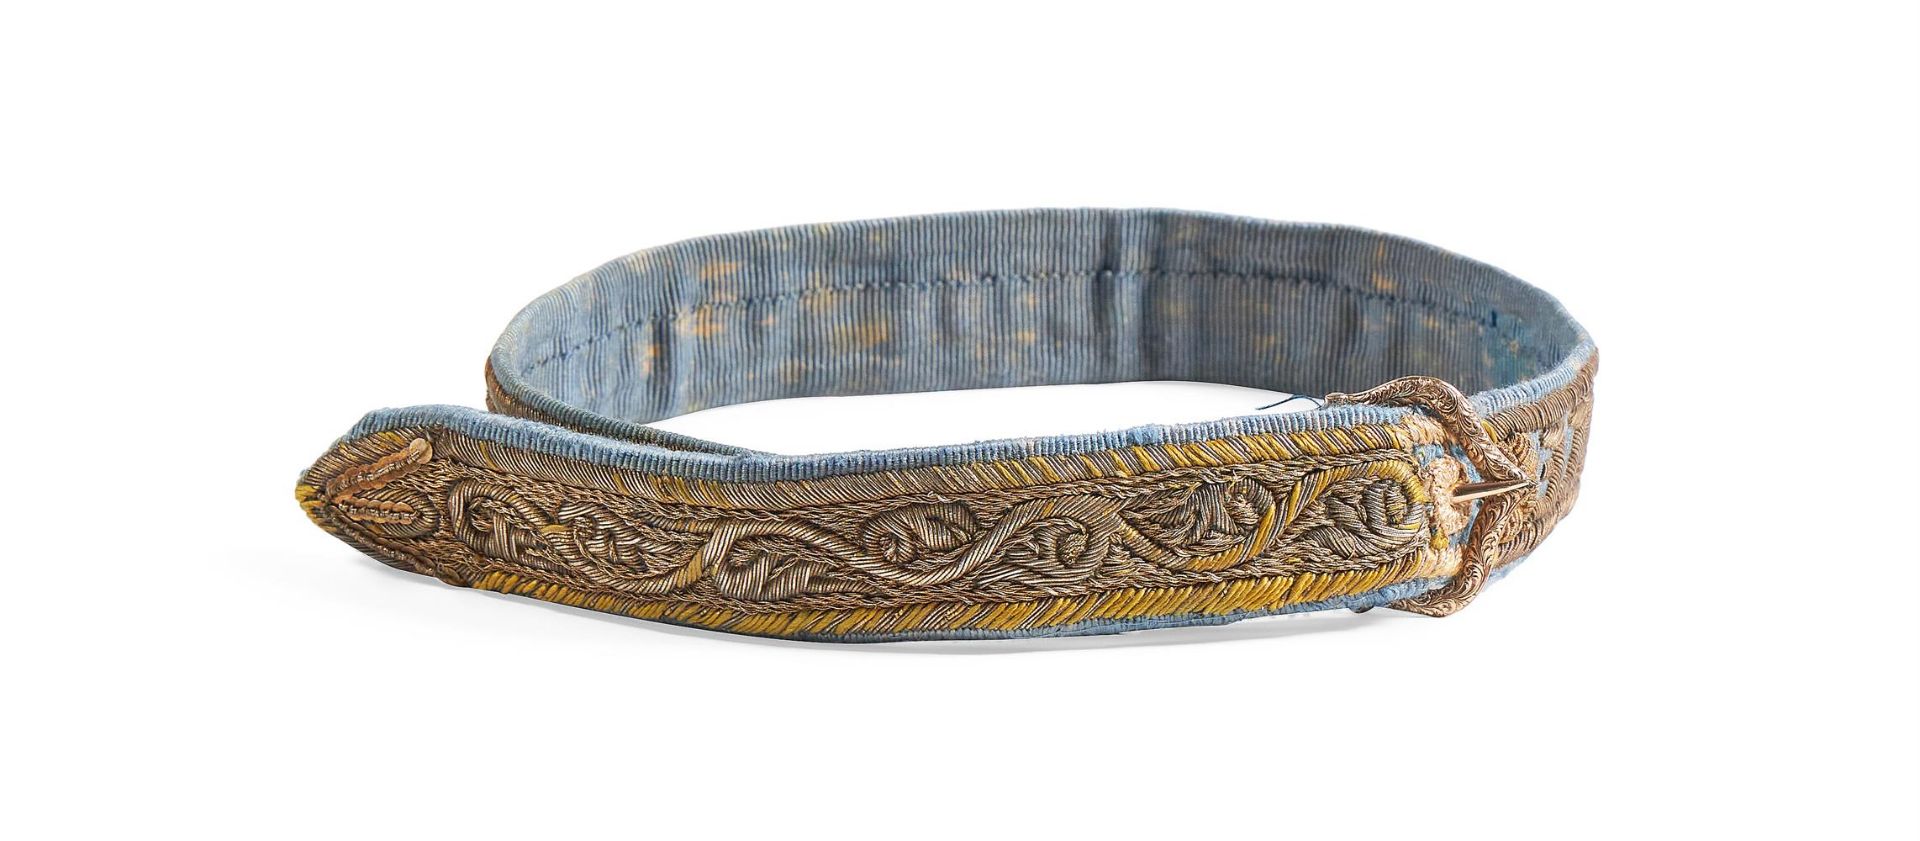 THE MOST NOBLE ORDER OF THE GARTER: A RARE SILVER GILT EMBROIDERED SILK GARTER, 18TH/19TH CENTURY - Bild 2 aus 3